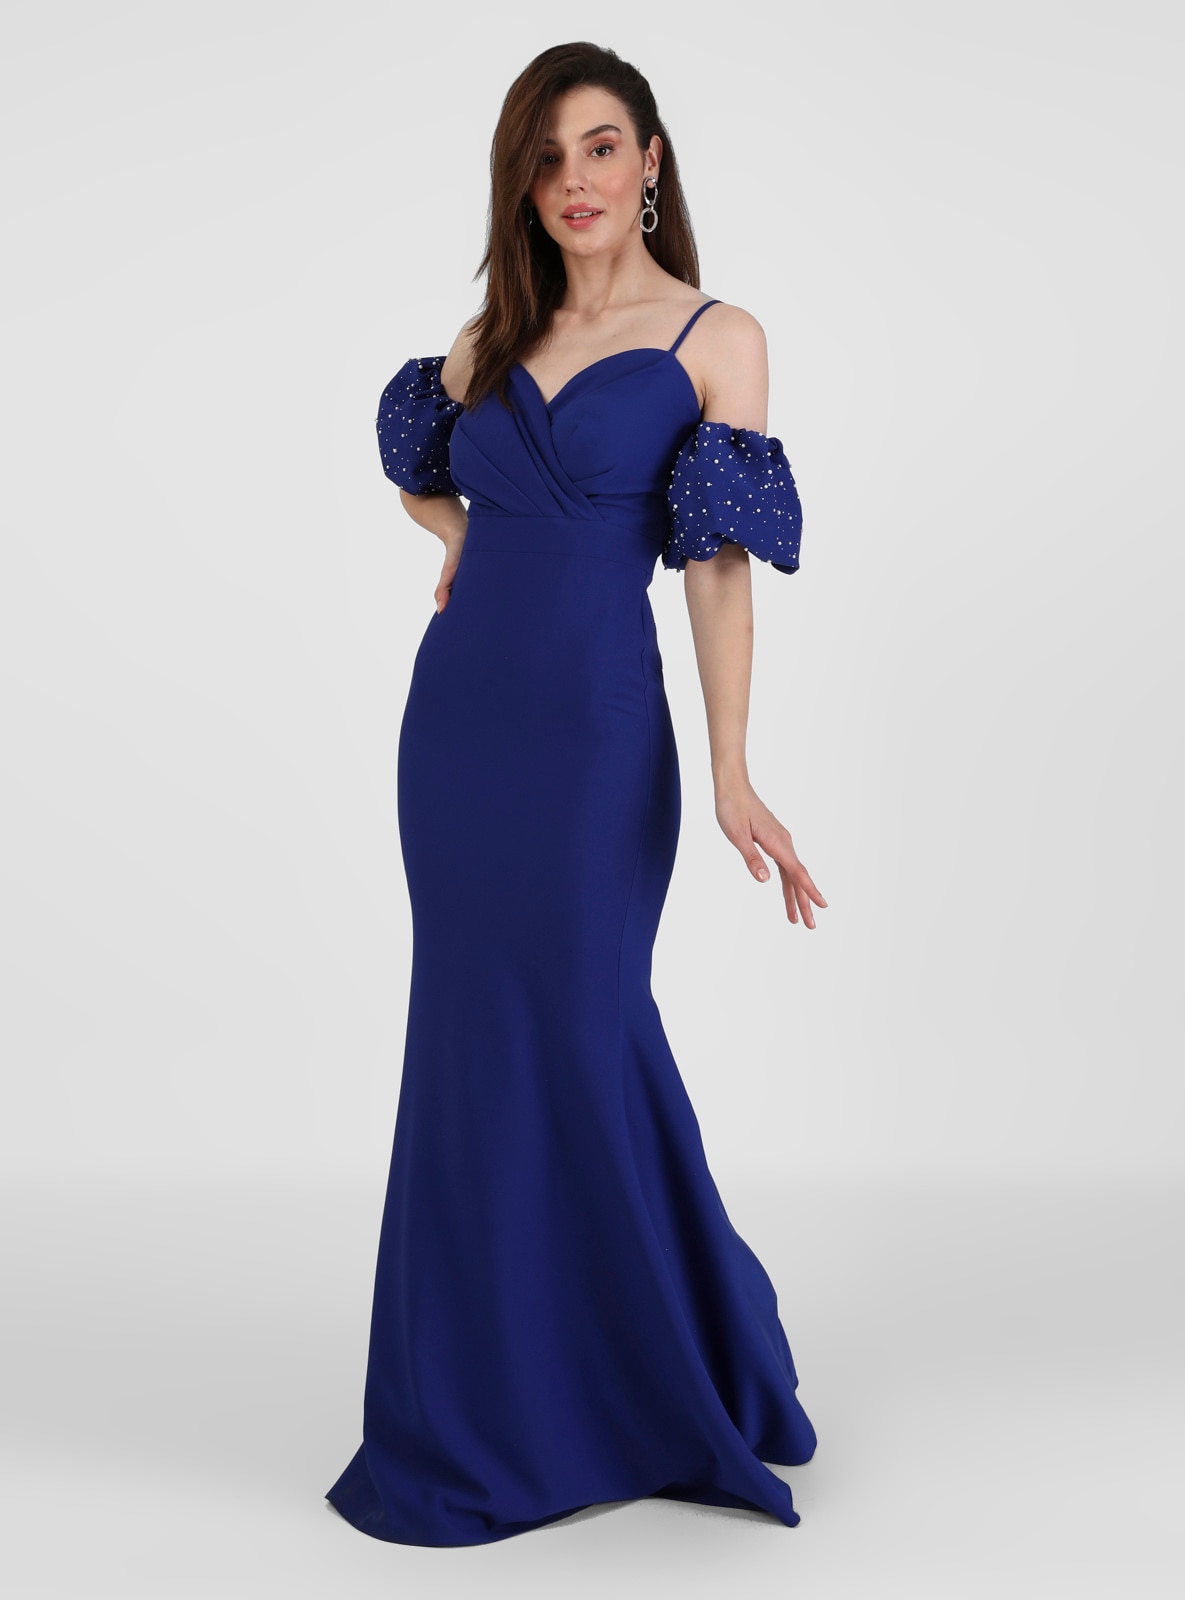 Unlined - Saxe - Evening Dresses